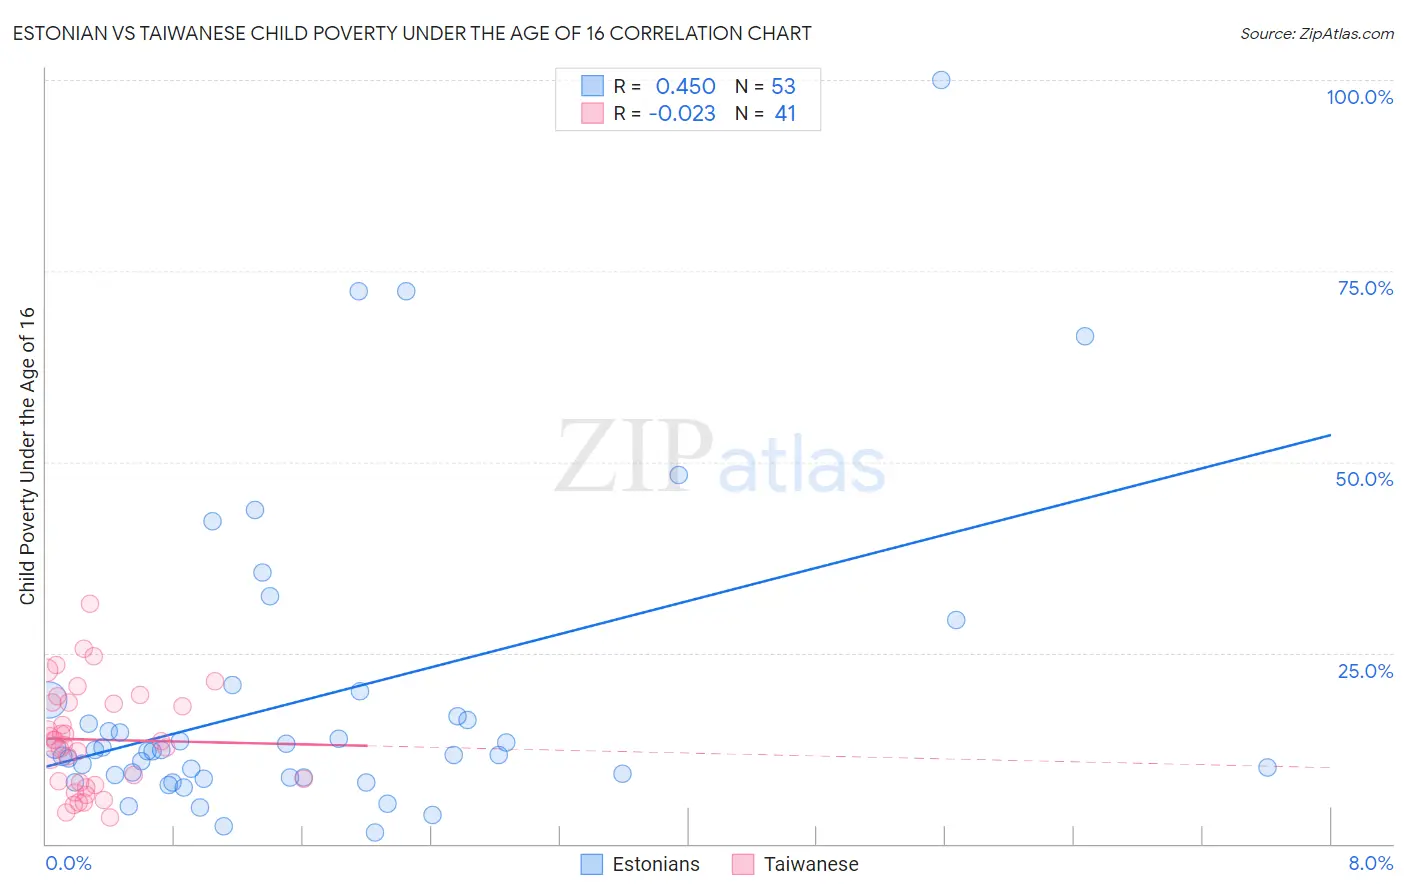 Estonian vs Taiwanese Child Poverty Under the Age of 16